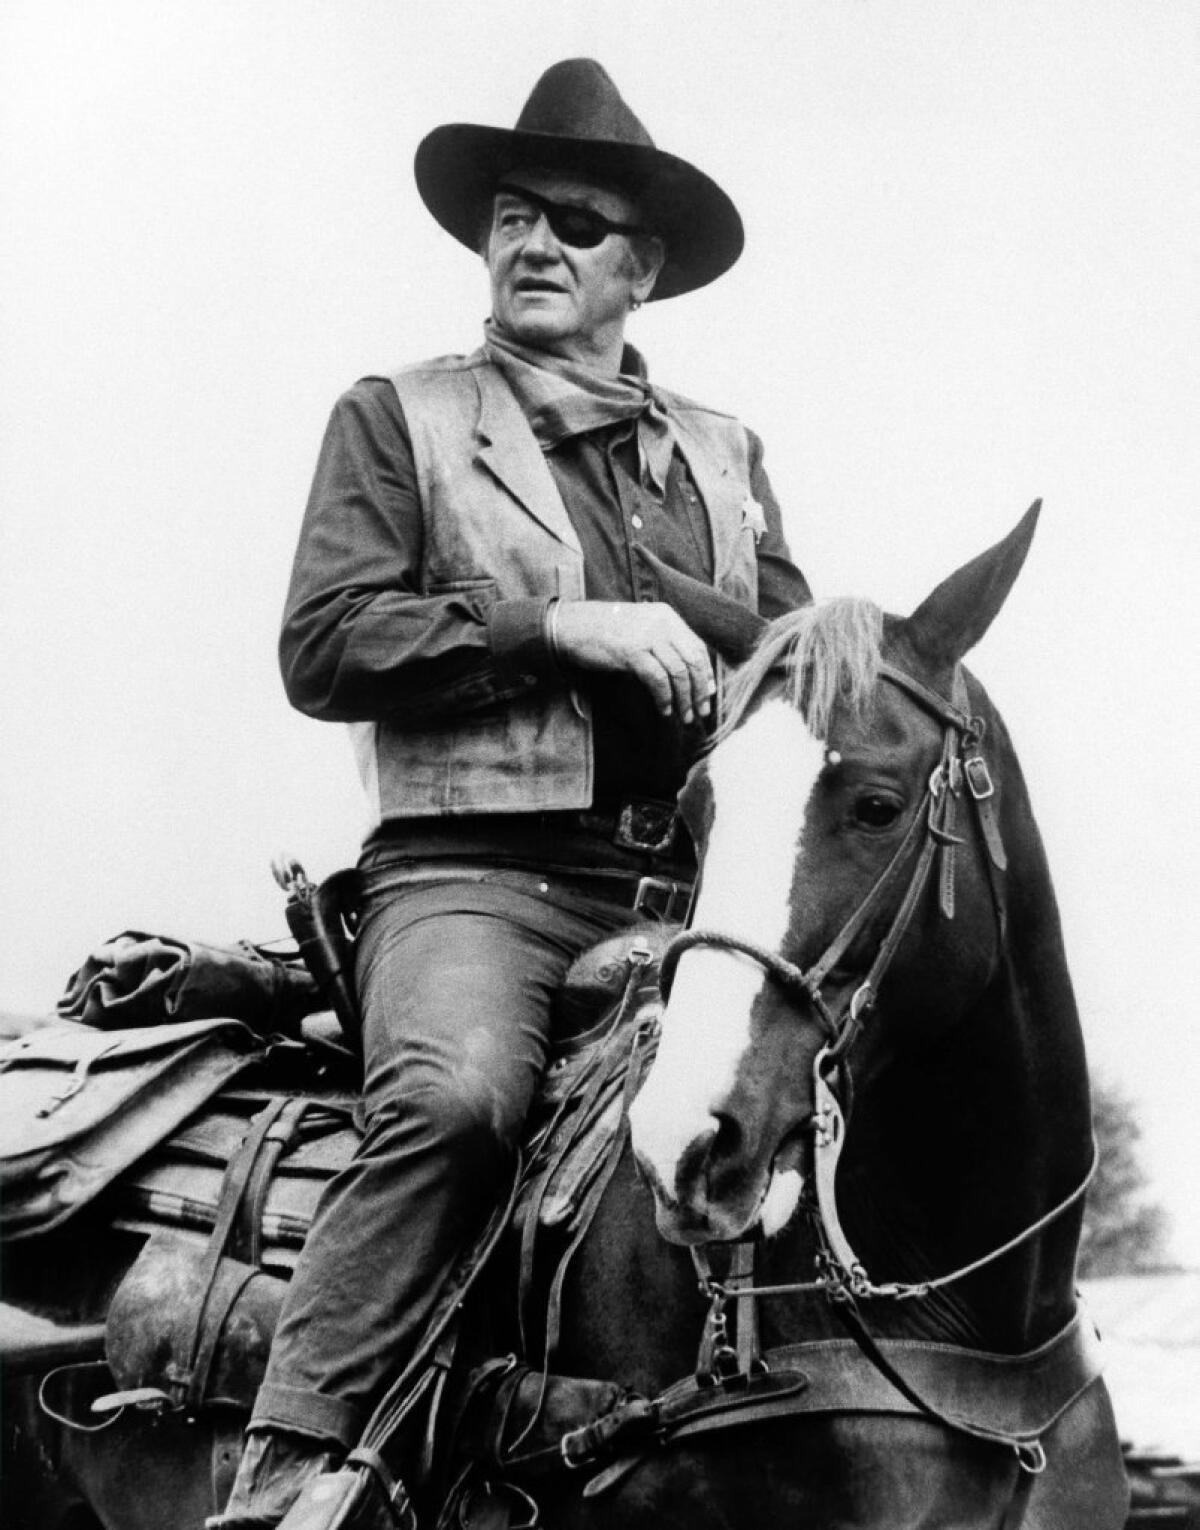 John Wayne, in his Oscar-winning role in the 1969 film "True Grit." His daughter's name is being falsely appended to an email circulating about President Obama.